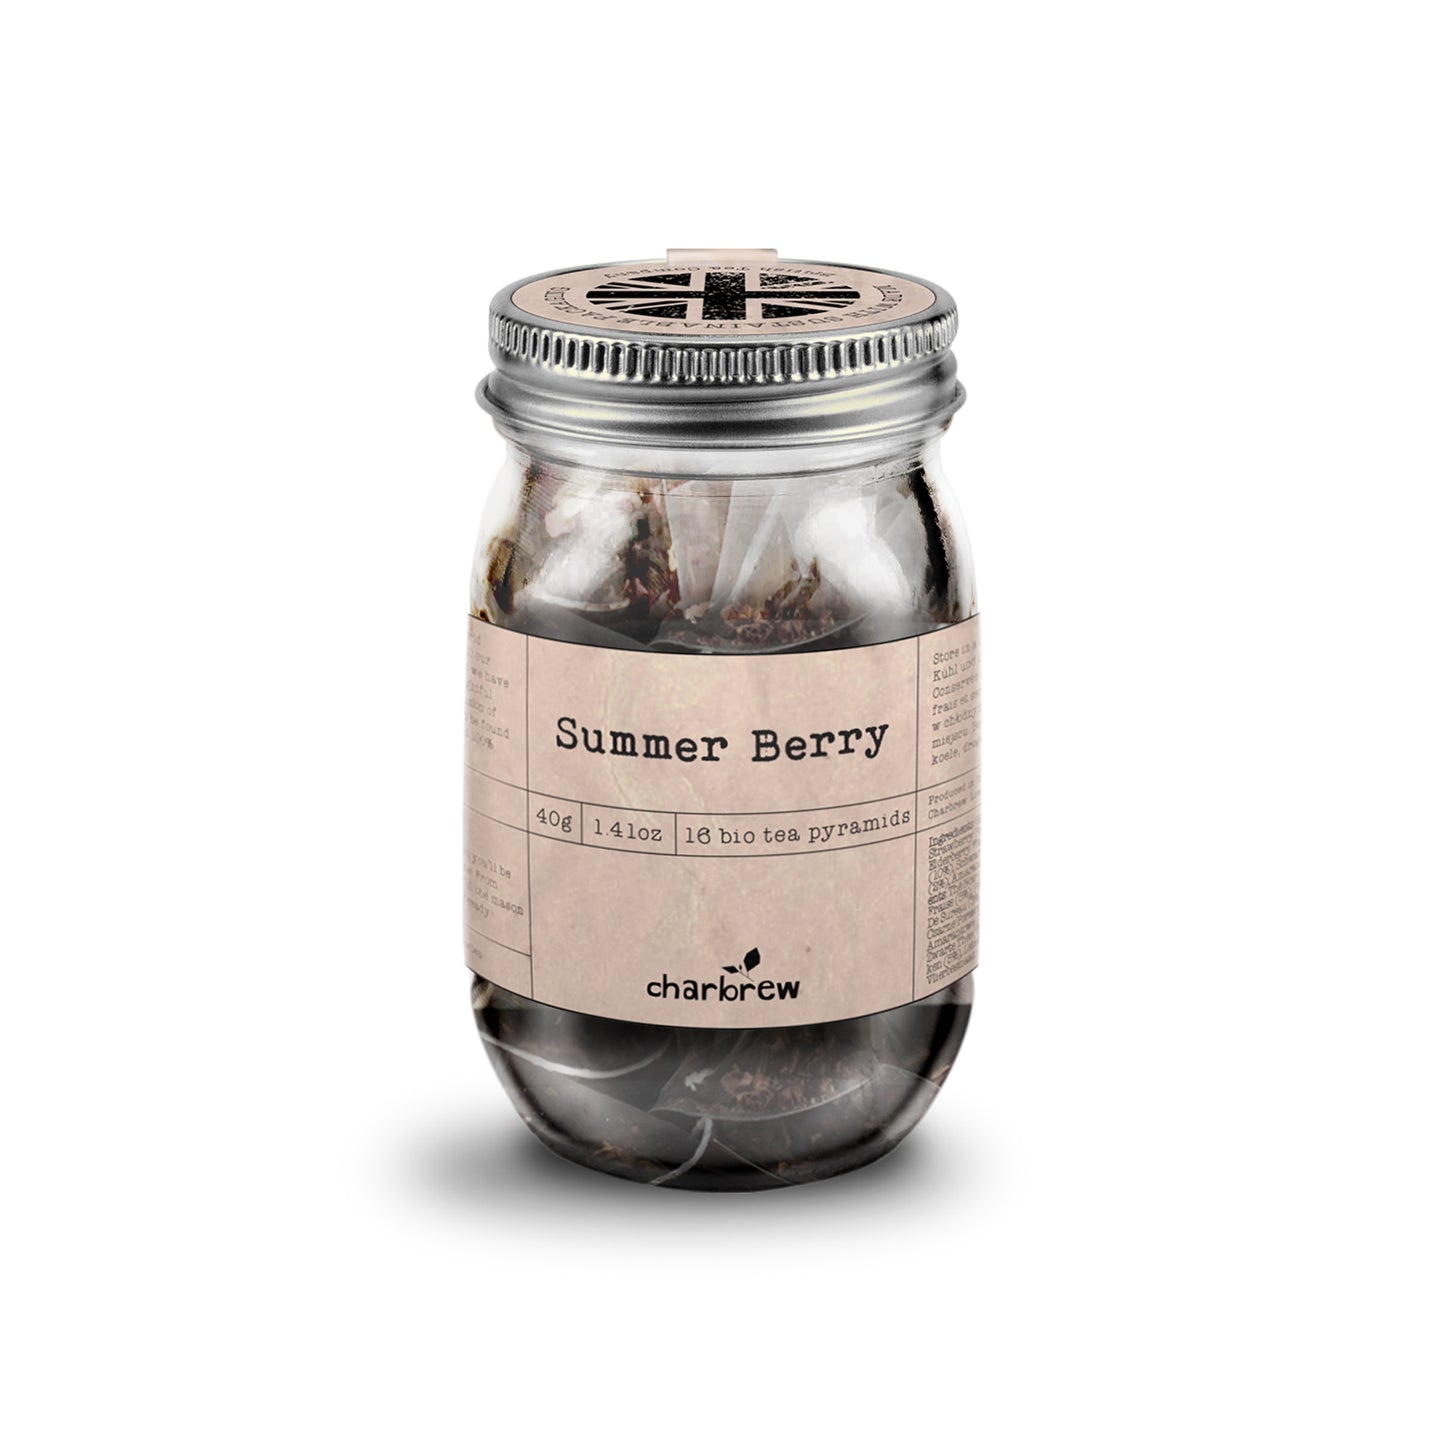 Charbrew carefully crafted summer berry tea in re-usable mason jar